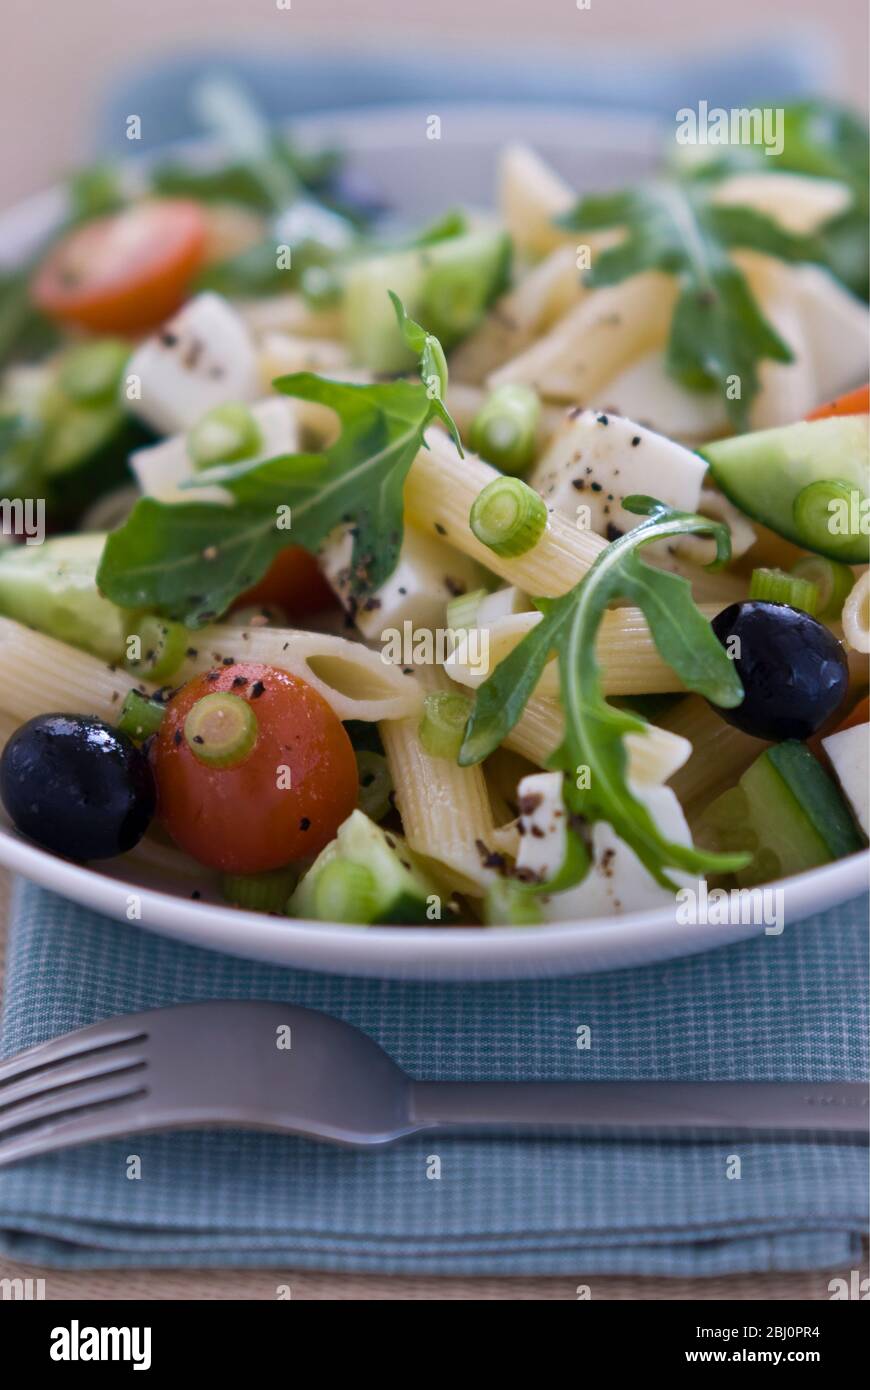 Light, healthy salad of rocket, and mozzarella cubes with penne pasta shapes dresssed in light vinaigrette. Short depth of field - Stock Photo